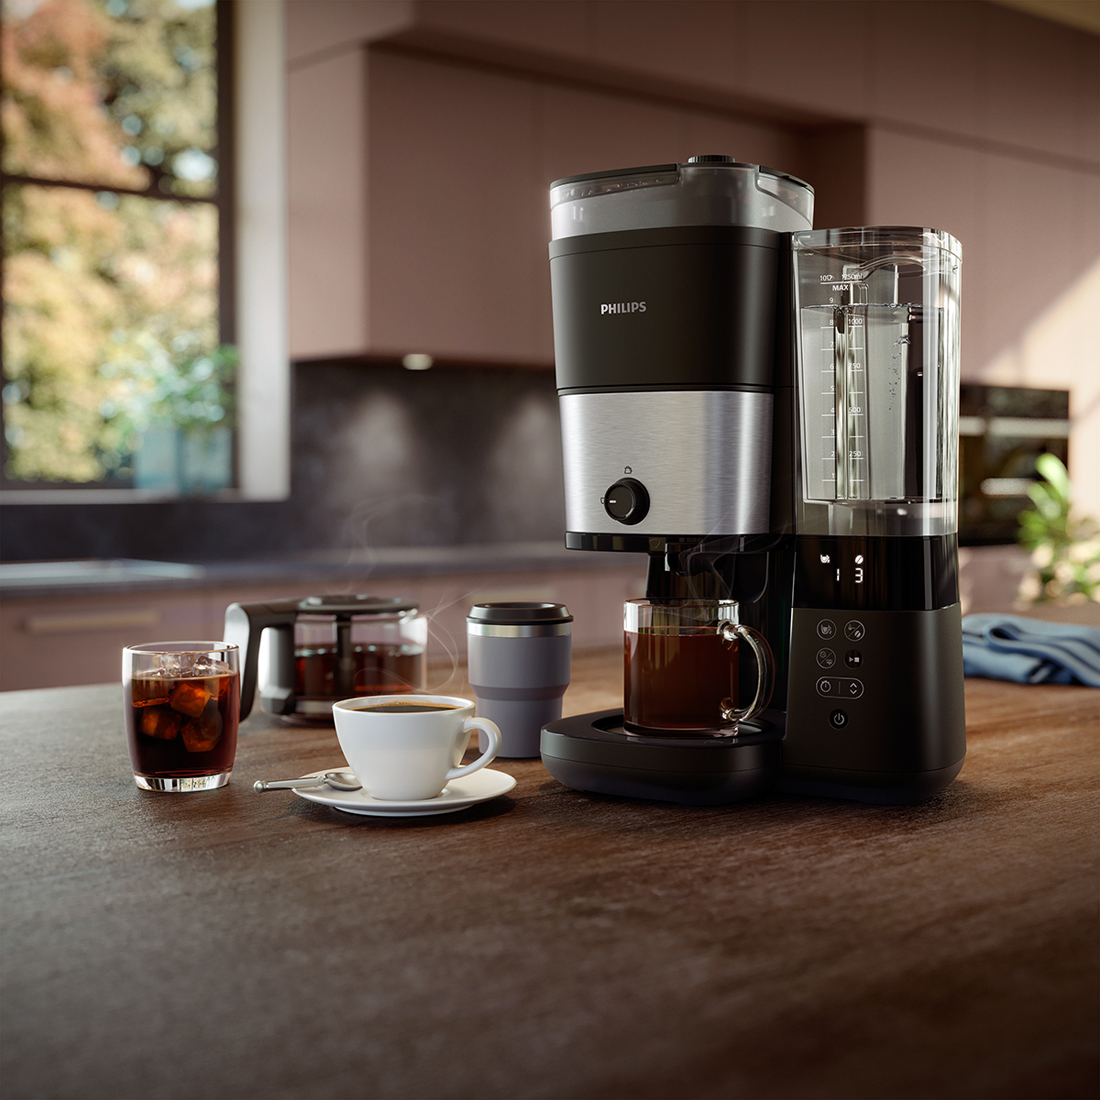 Philips Grind & Brew Coffee Maker